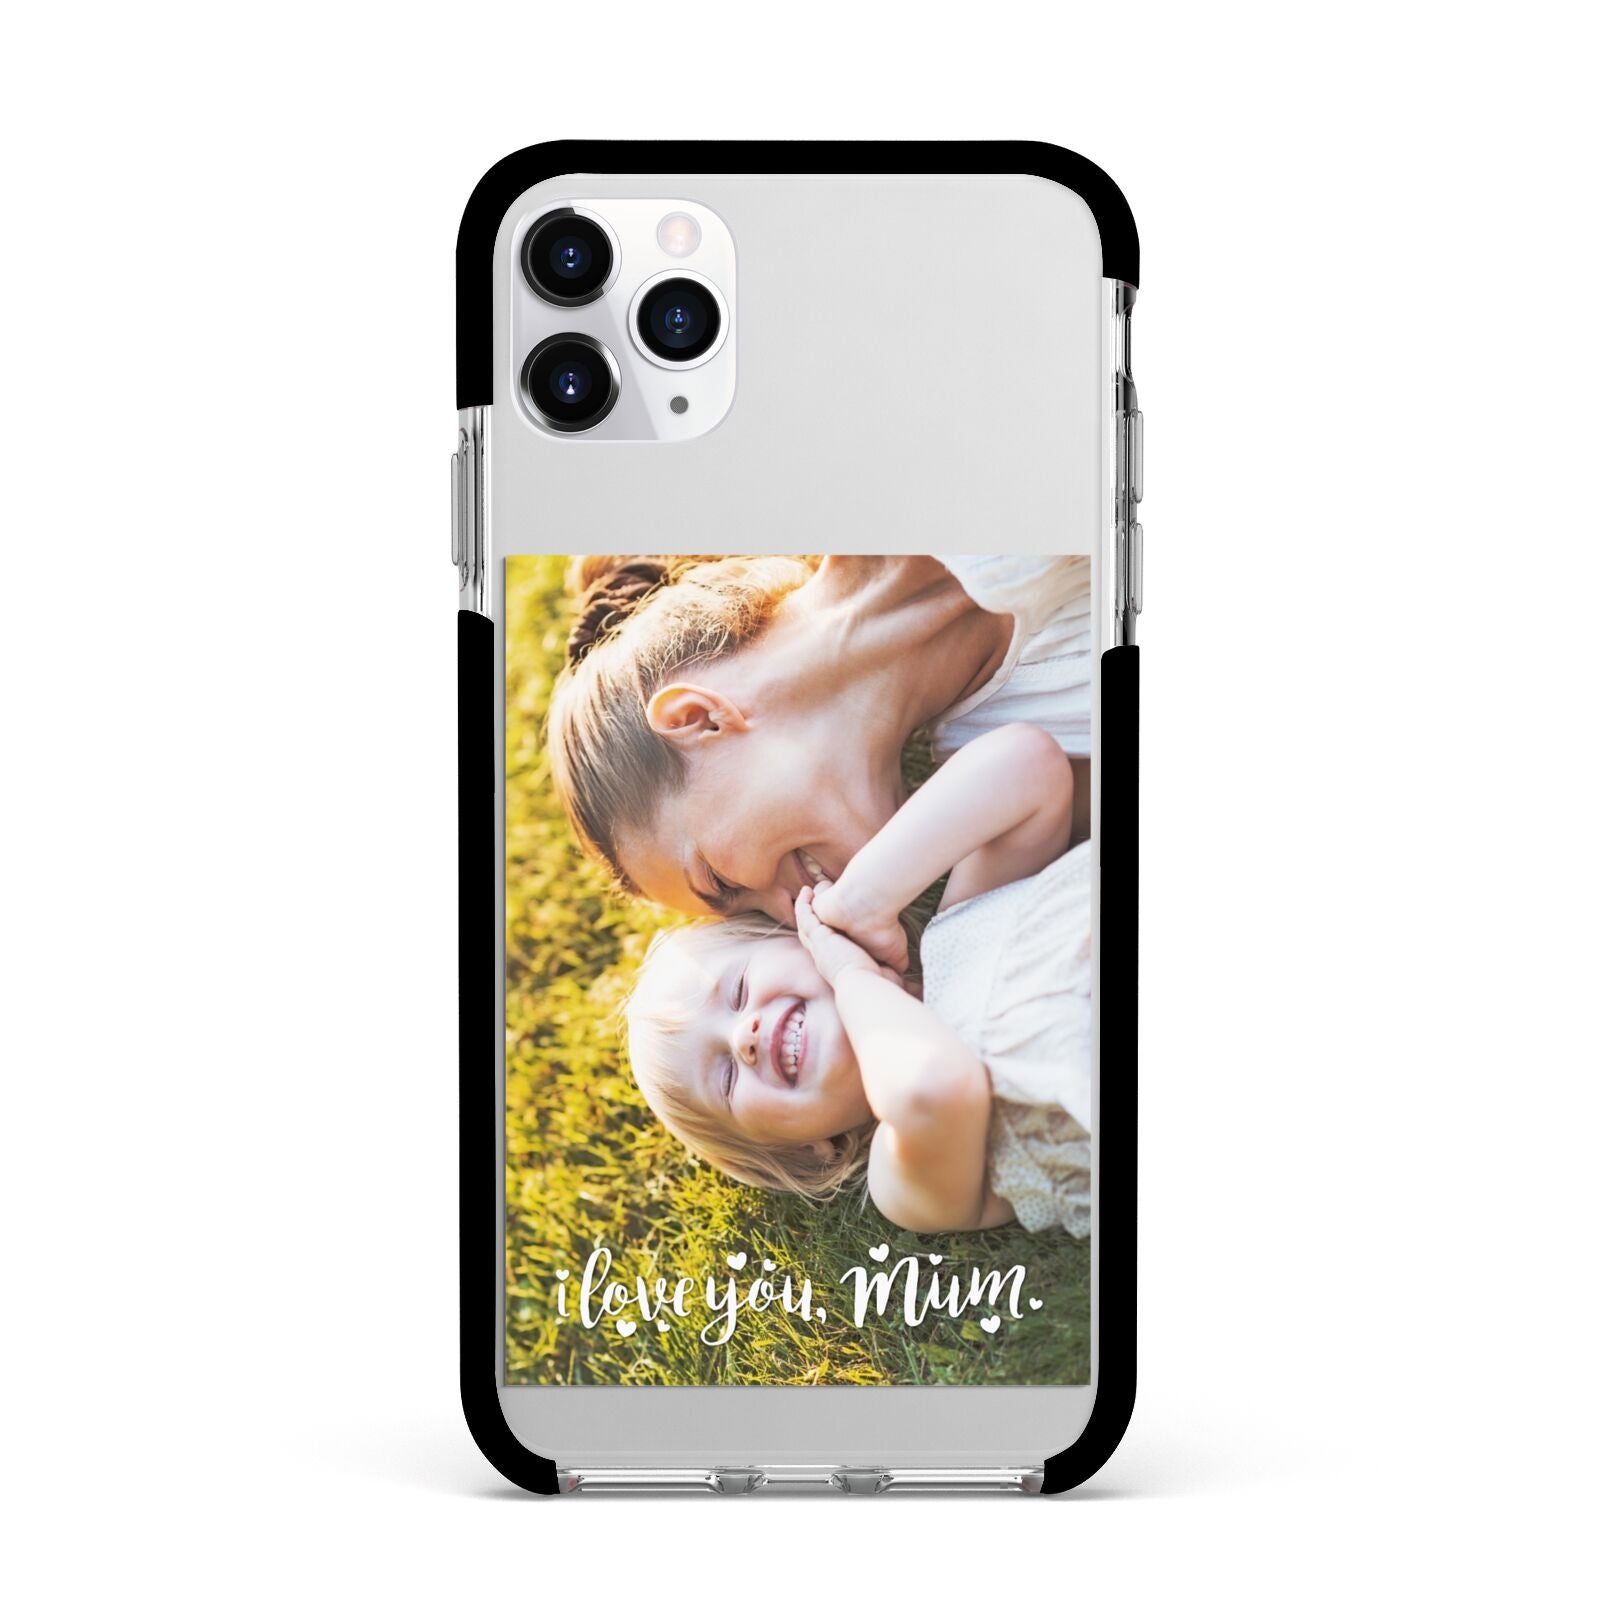 Love You Mum Photo Upload Apple iPhone 11 Pro Max in Silver with Black Impact Case